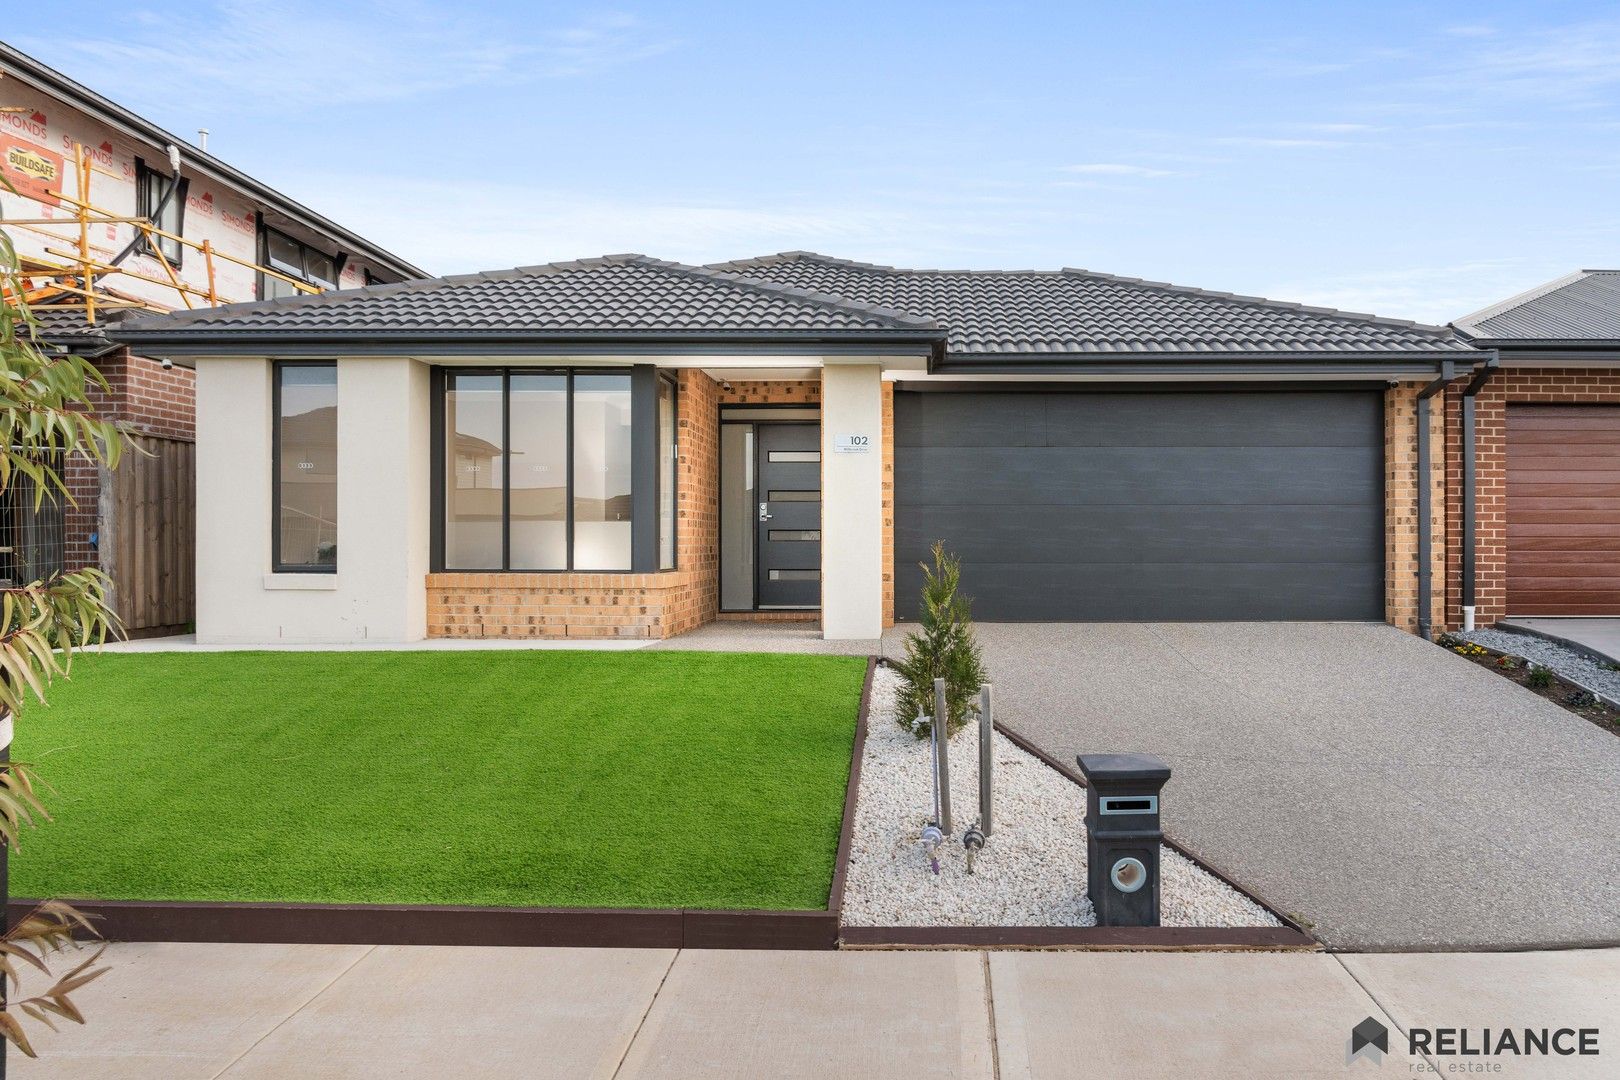 4 bedrooms House in 102 Millbrook Drive WYNDHAM VALE VIC, 3024